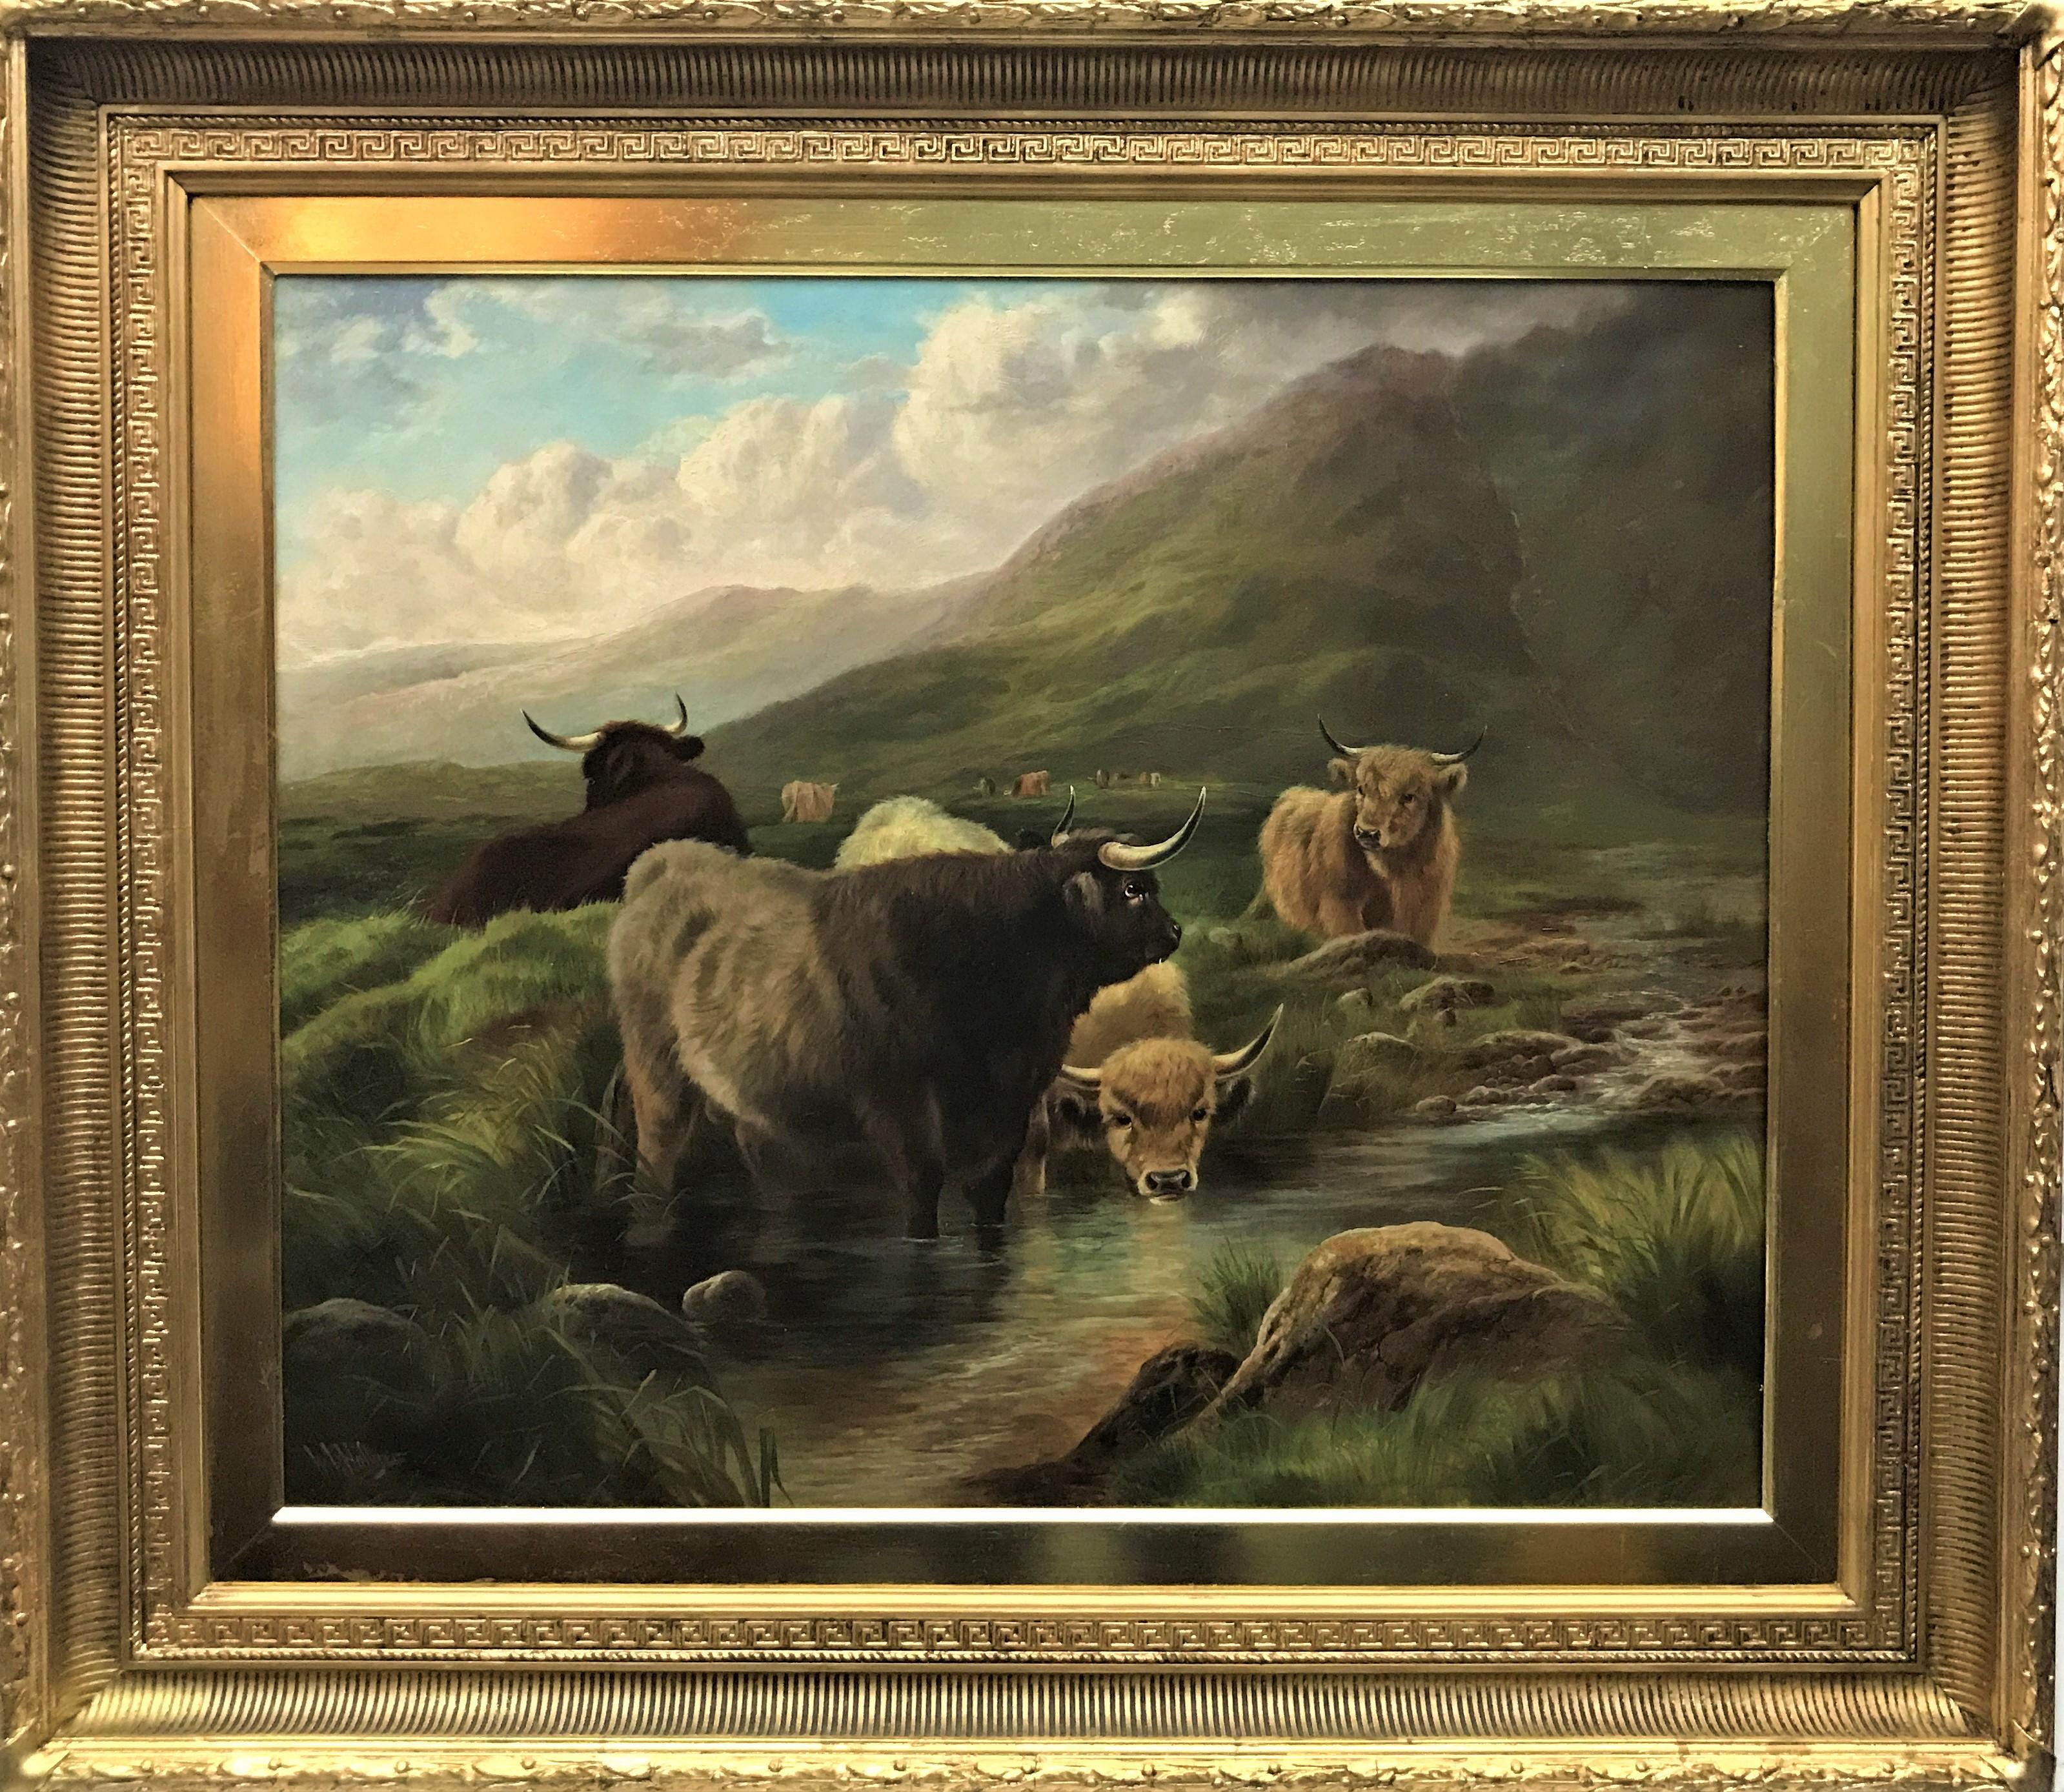 Highland Cattle in a Mountain Glen, original oil on canvas, 19thC British - Painting by William Perring Hollyer